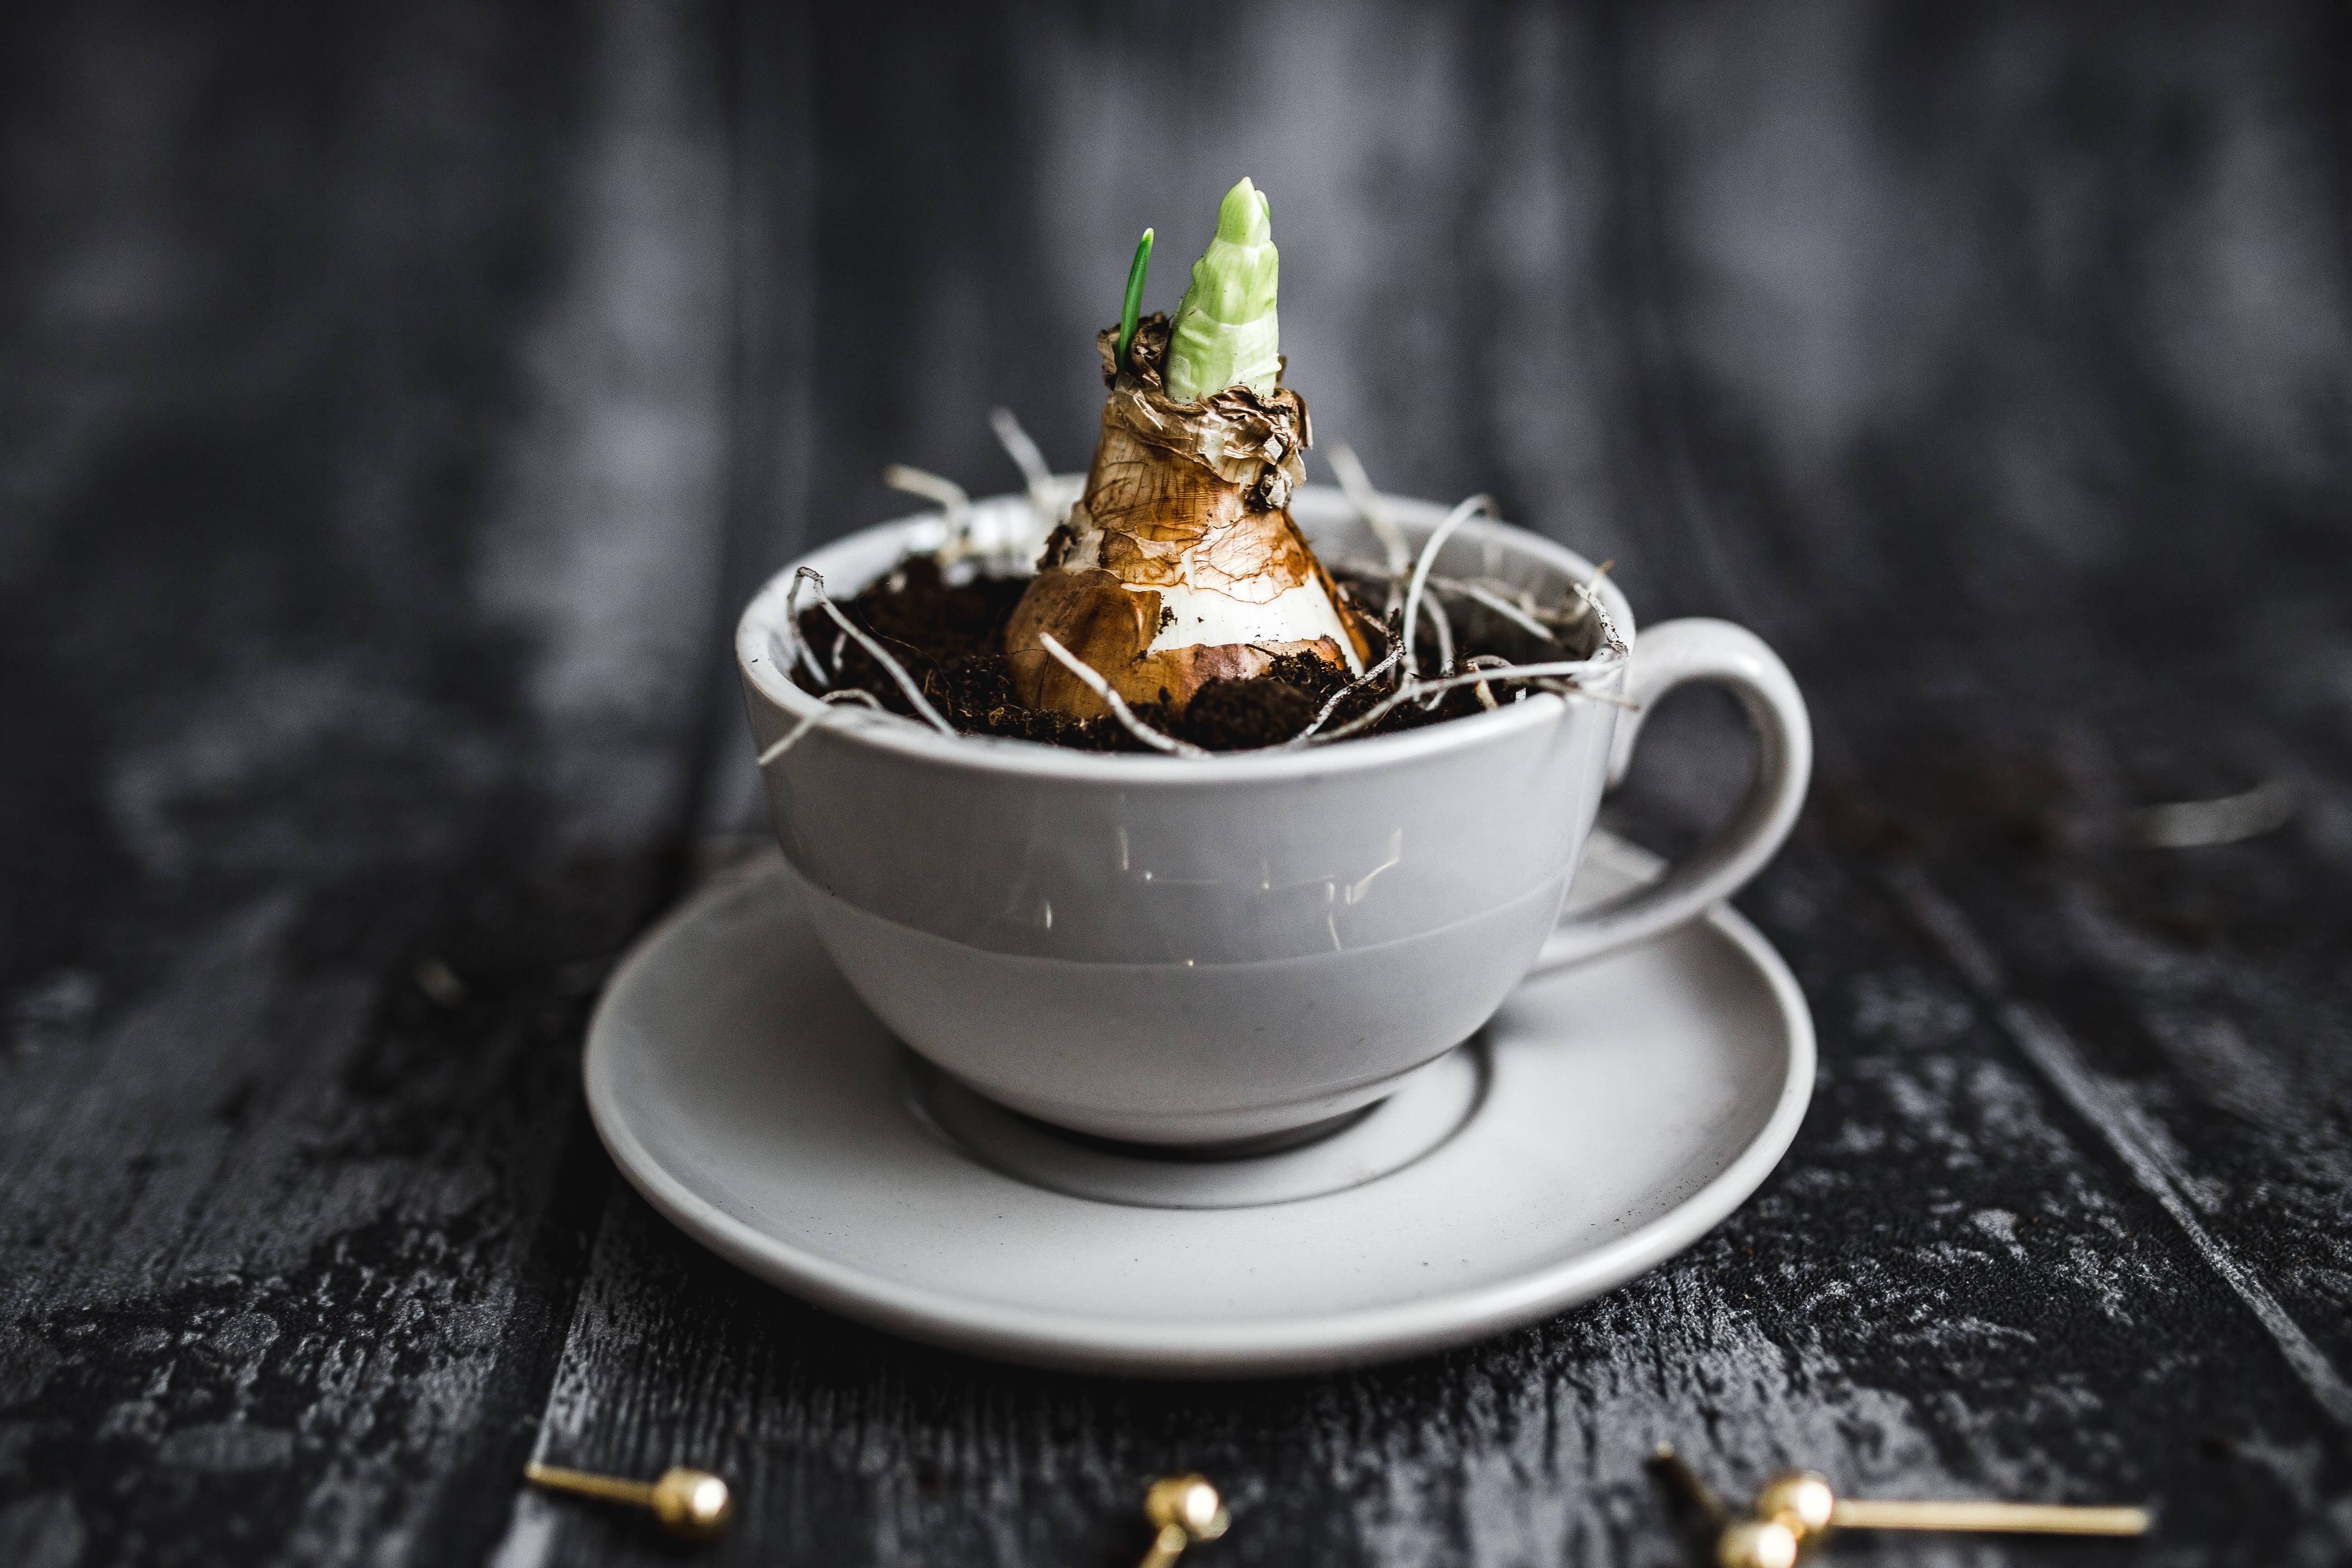 Little seedling in a cup with small golden pins on a wooden board